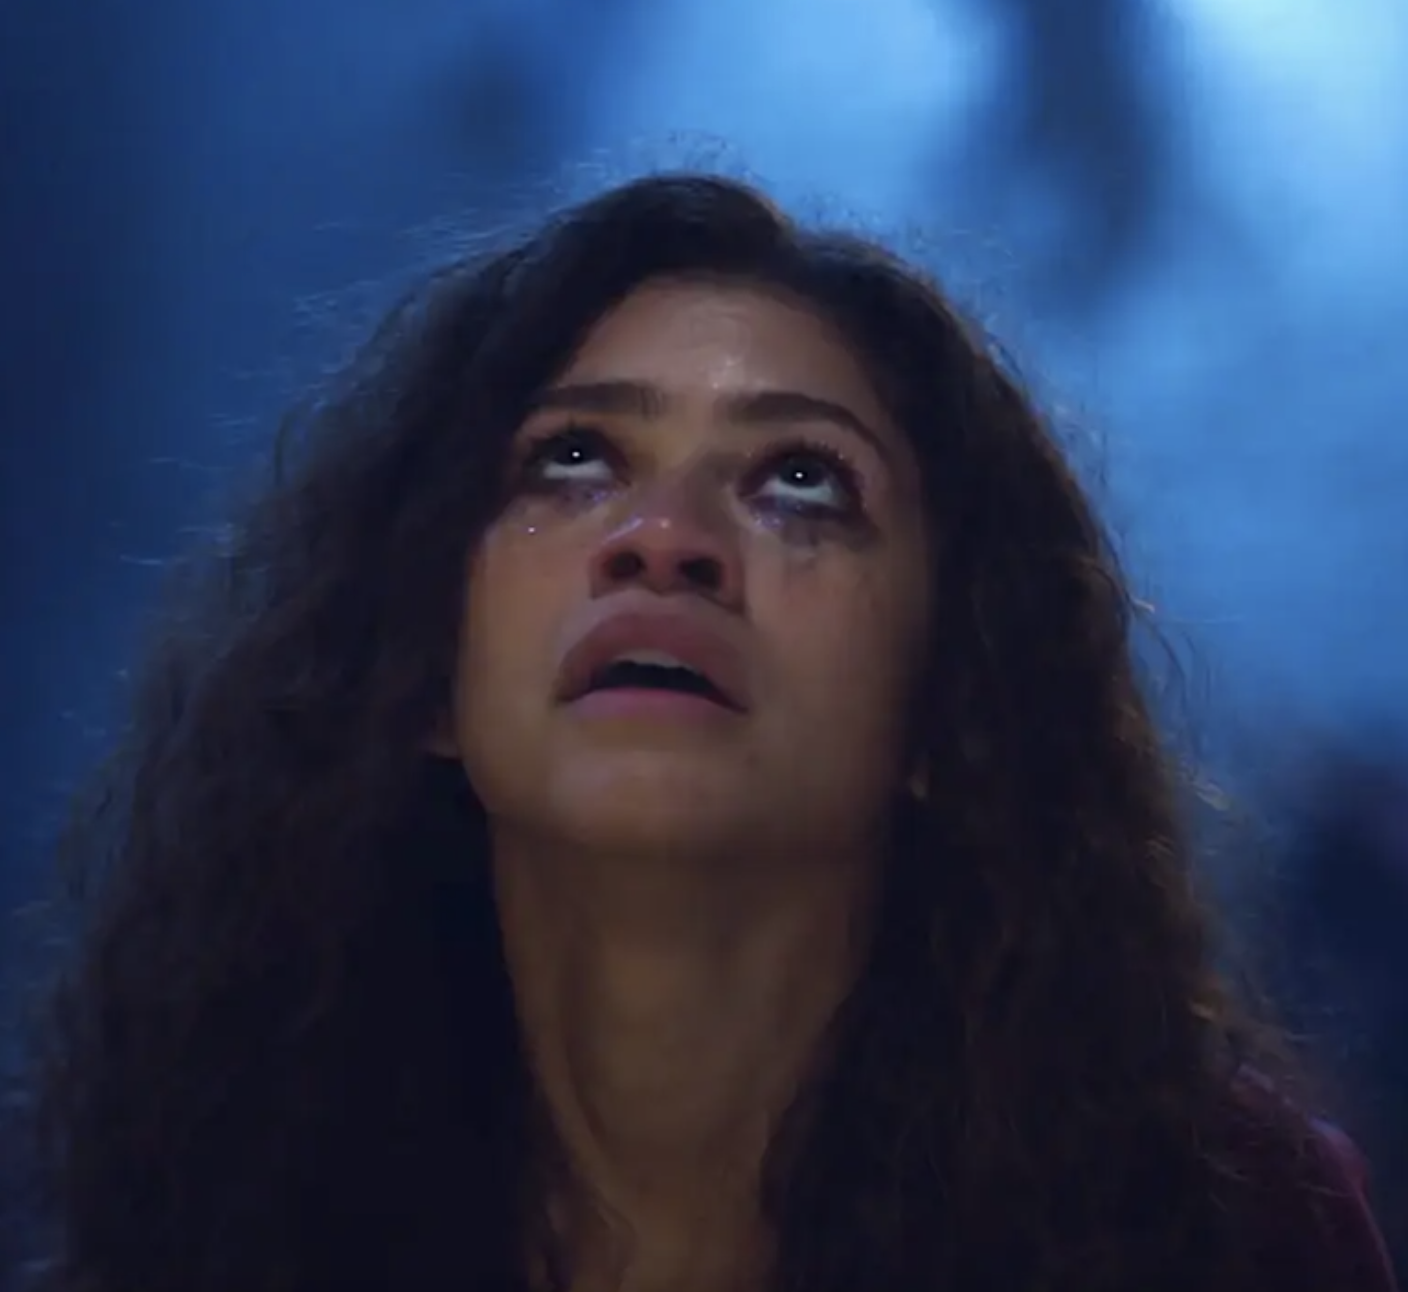 Euphoria' finale: Here's what happened to Rue and Fez at season 1 end